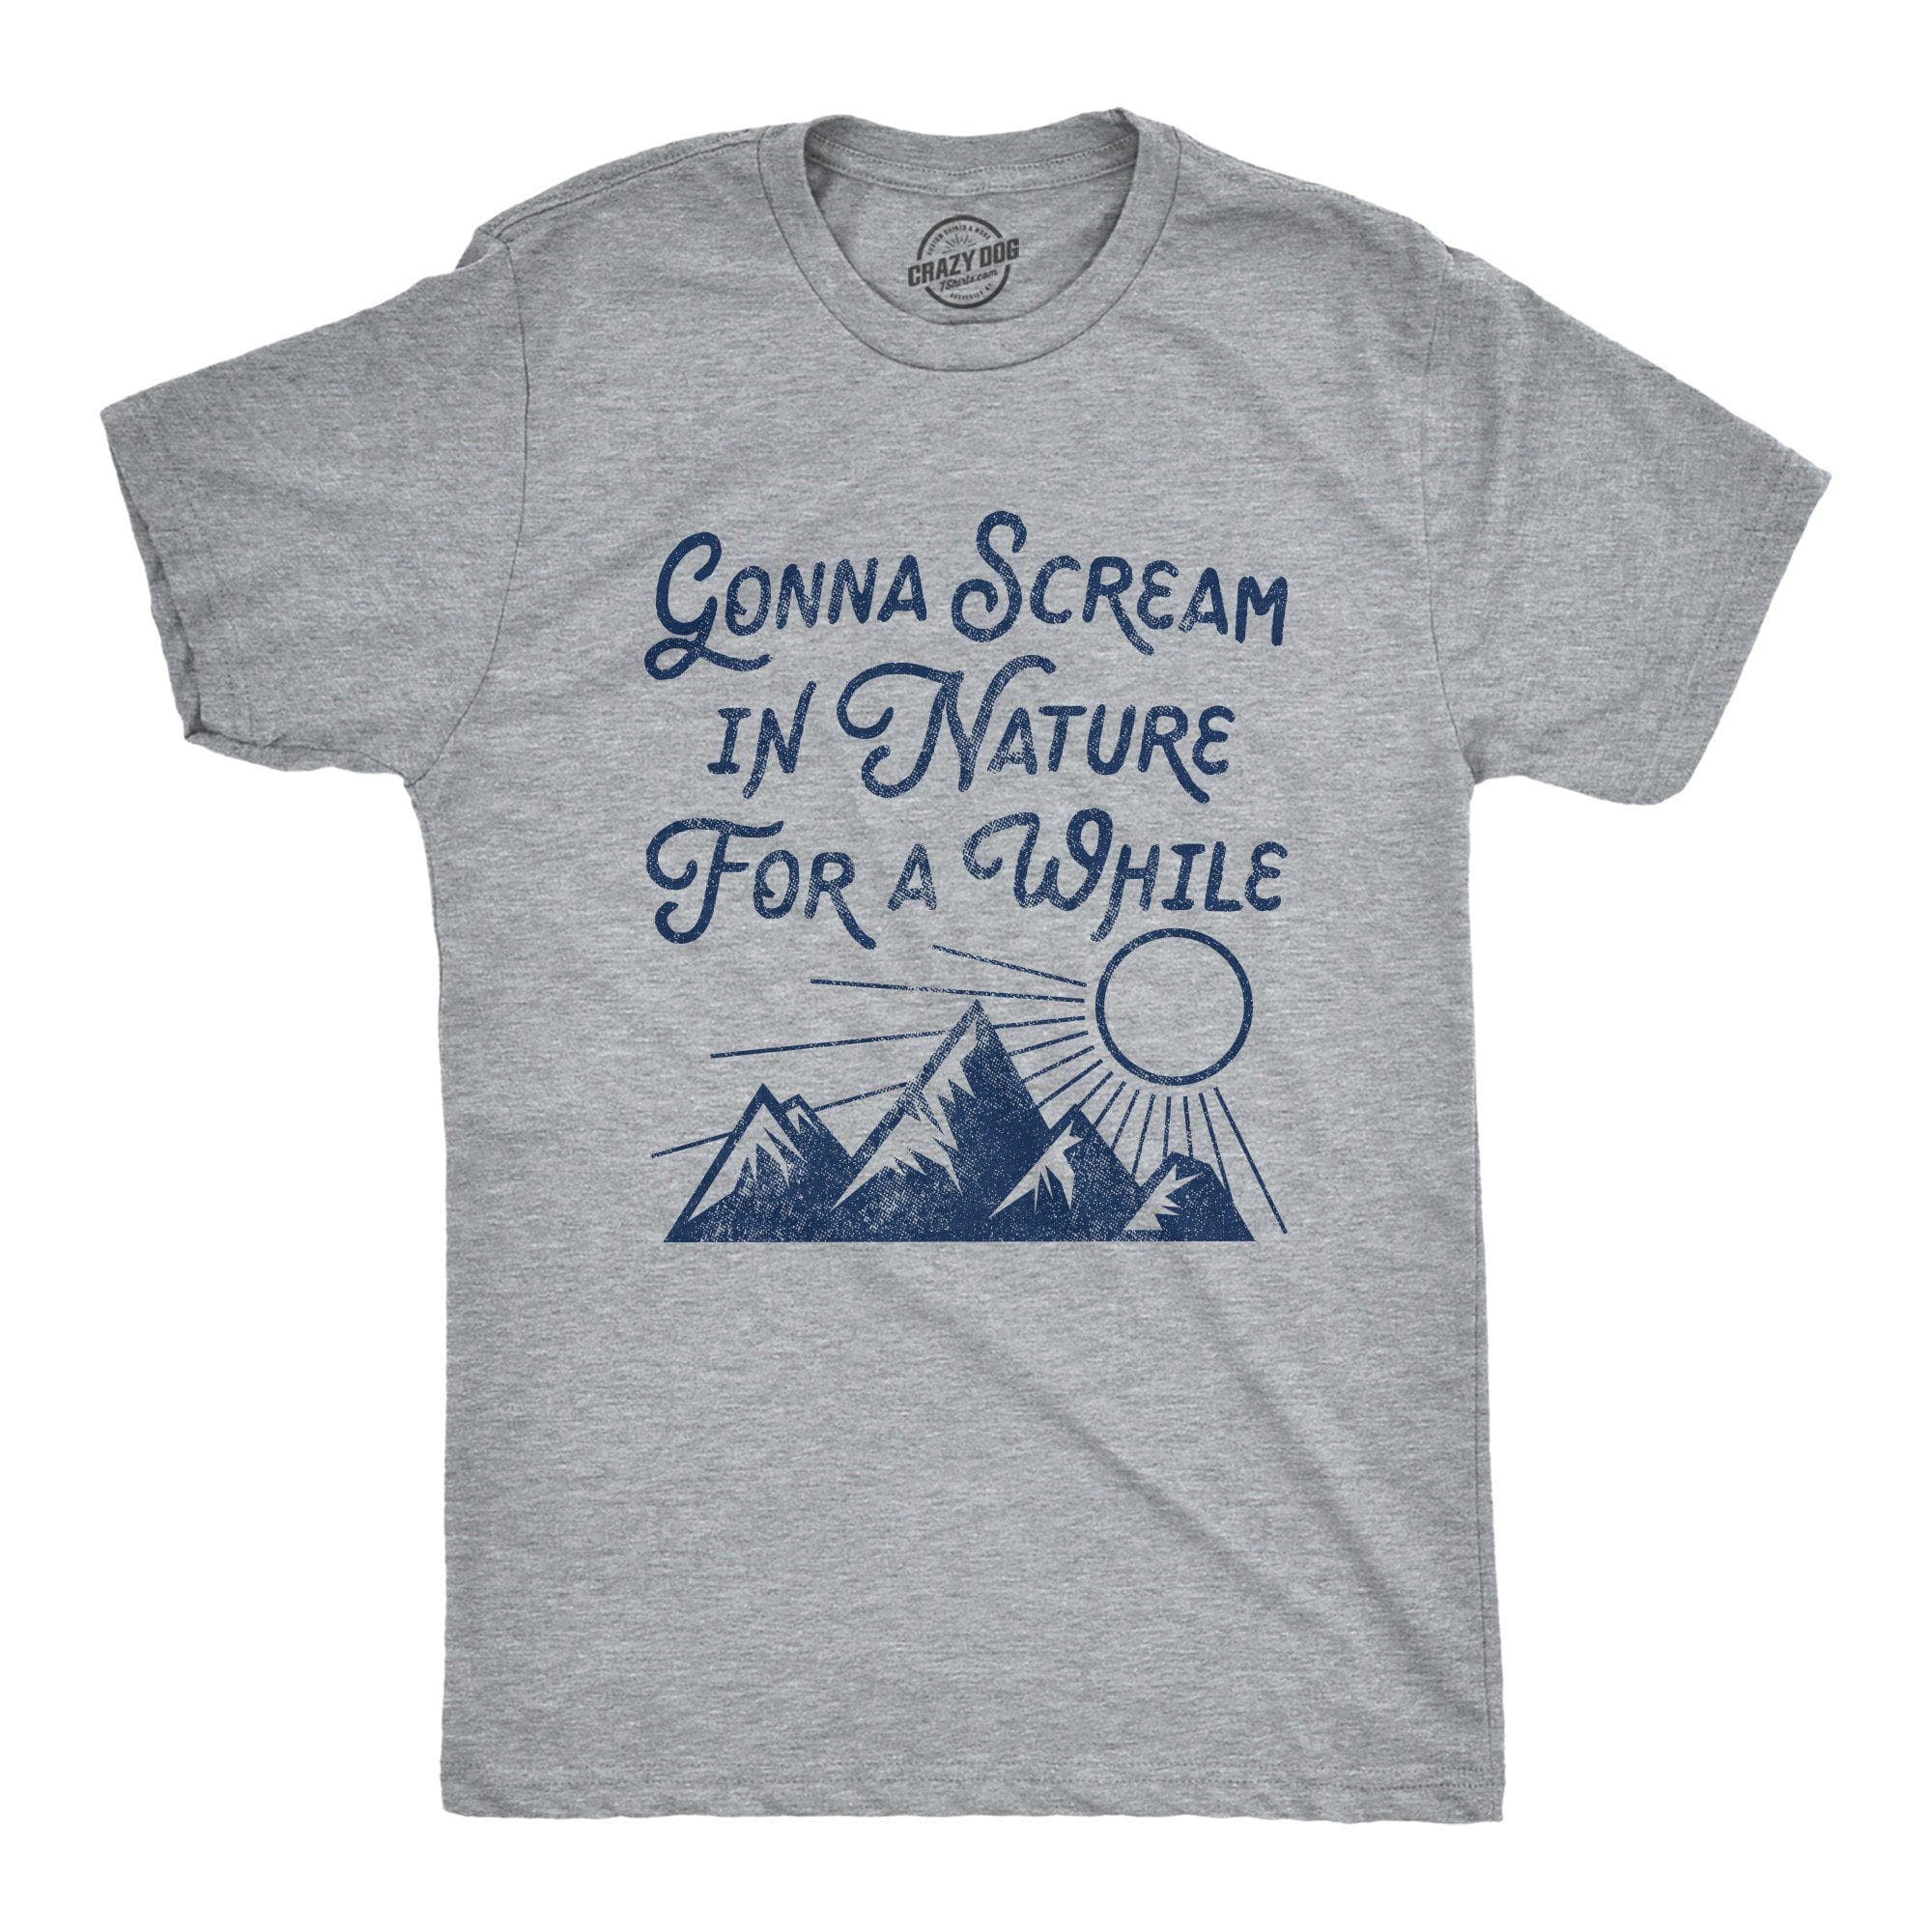 Gonna Scream I'm Nature For A While Men's Tshirt - Crazy Dog T-Shirts